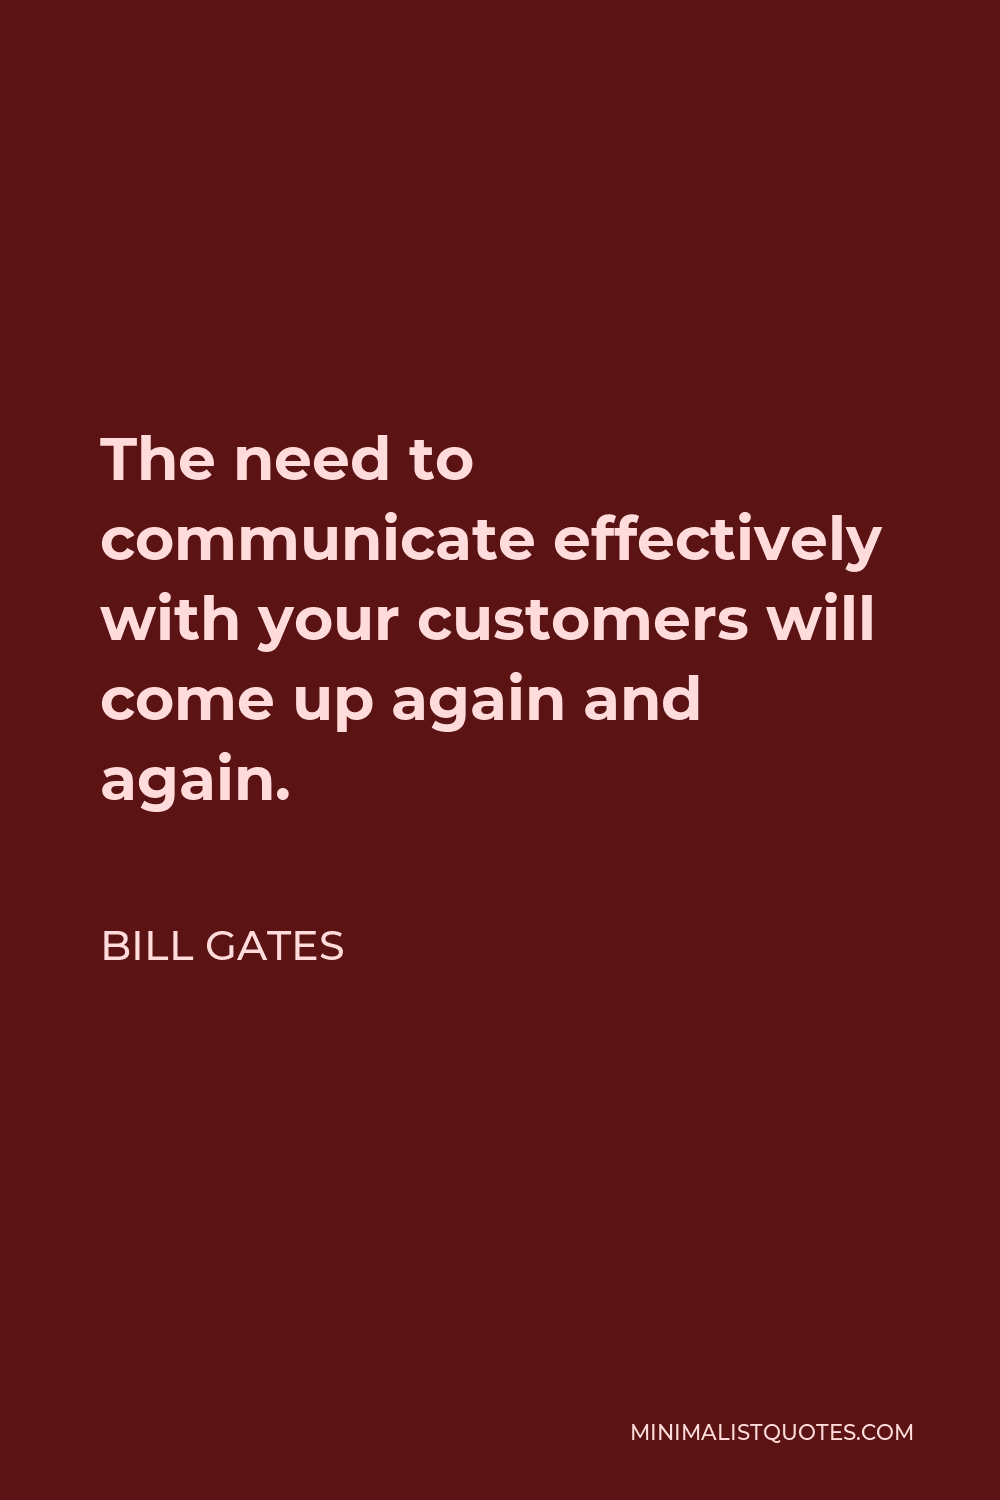 Bill Gates Quote - The need to communicate effectively with your customers will come up again and again.